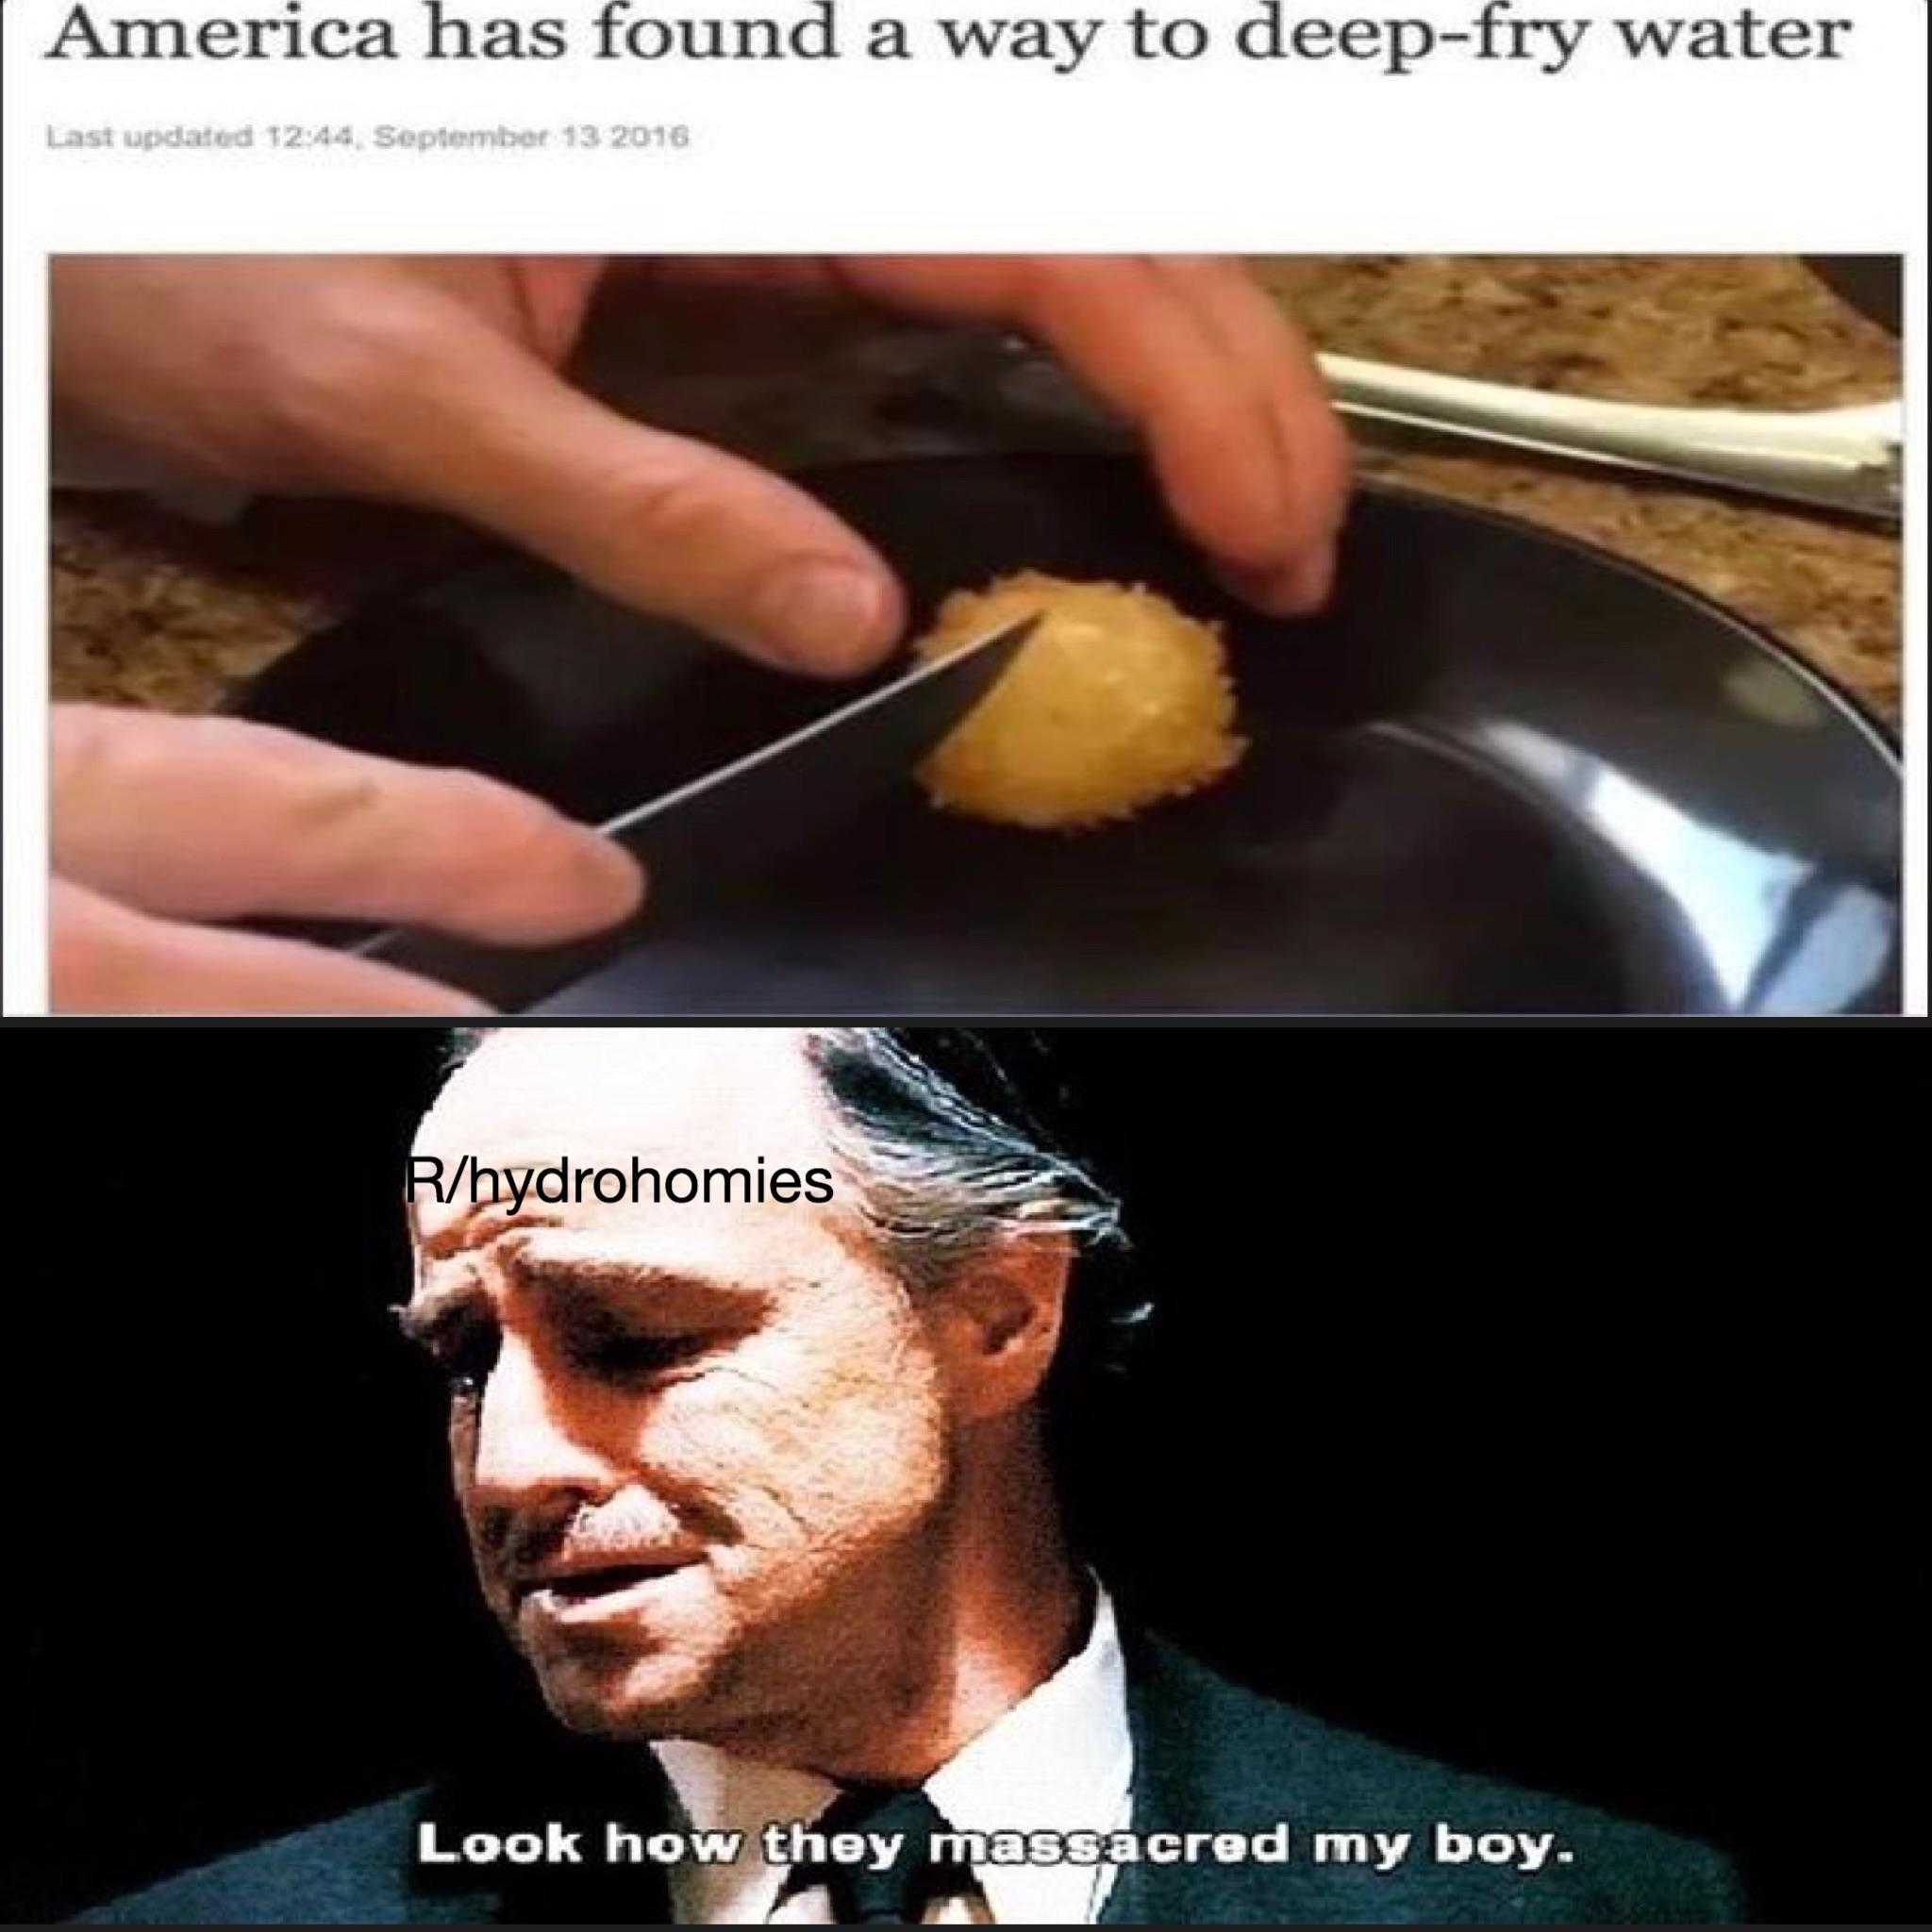 water water-memes water text: America has found a way to deep-fry water Last 13 2016 bydrohomies Look how they massacred my boy. 